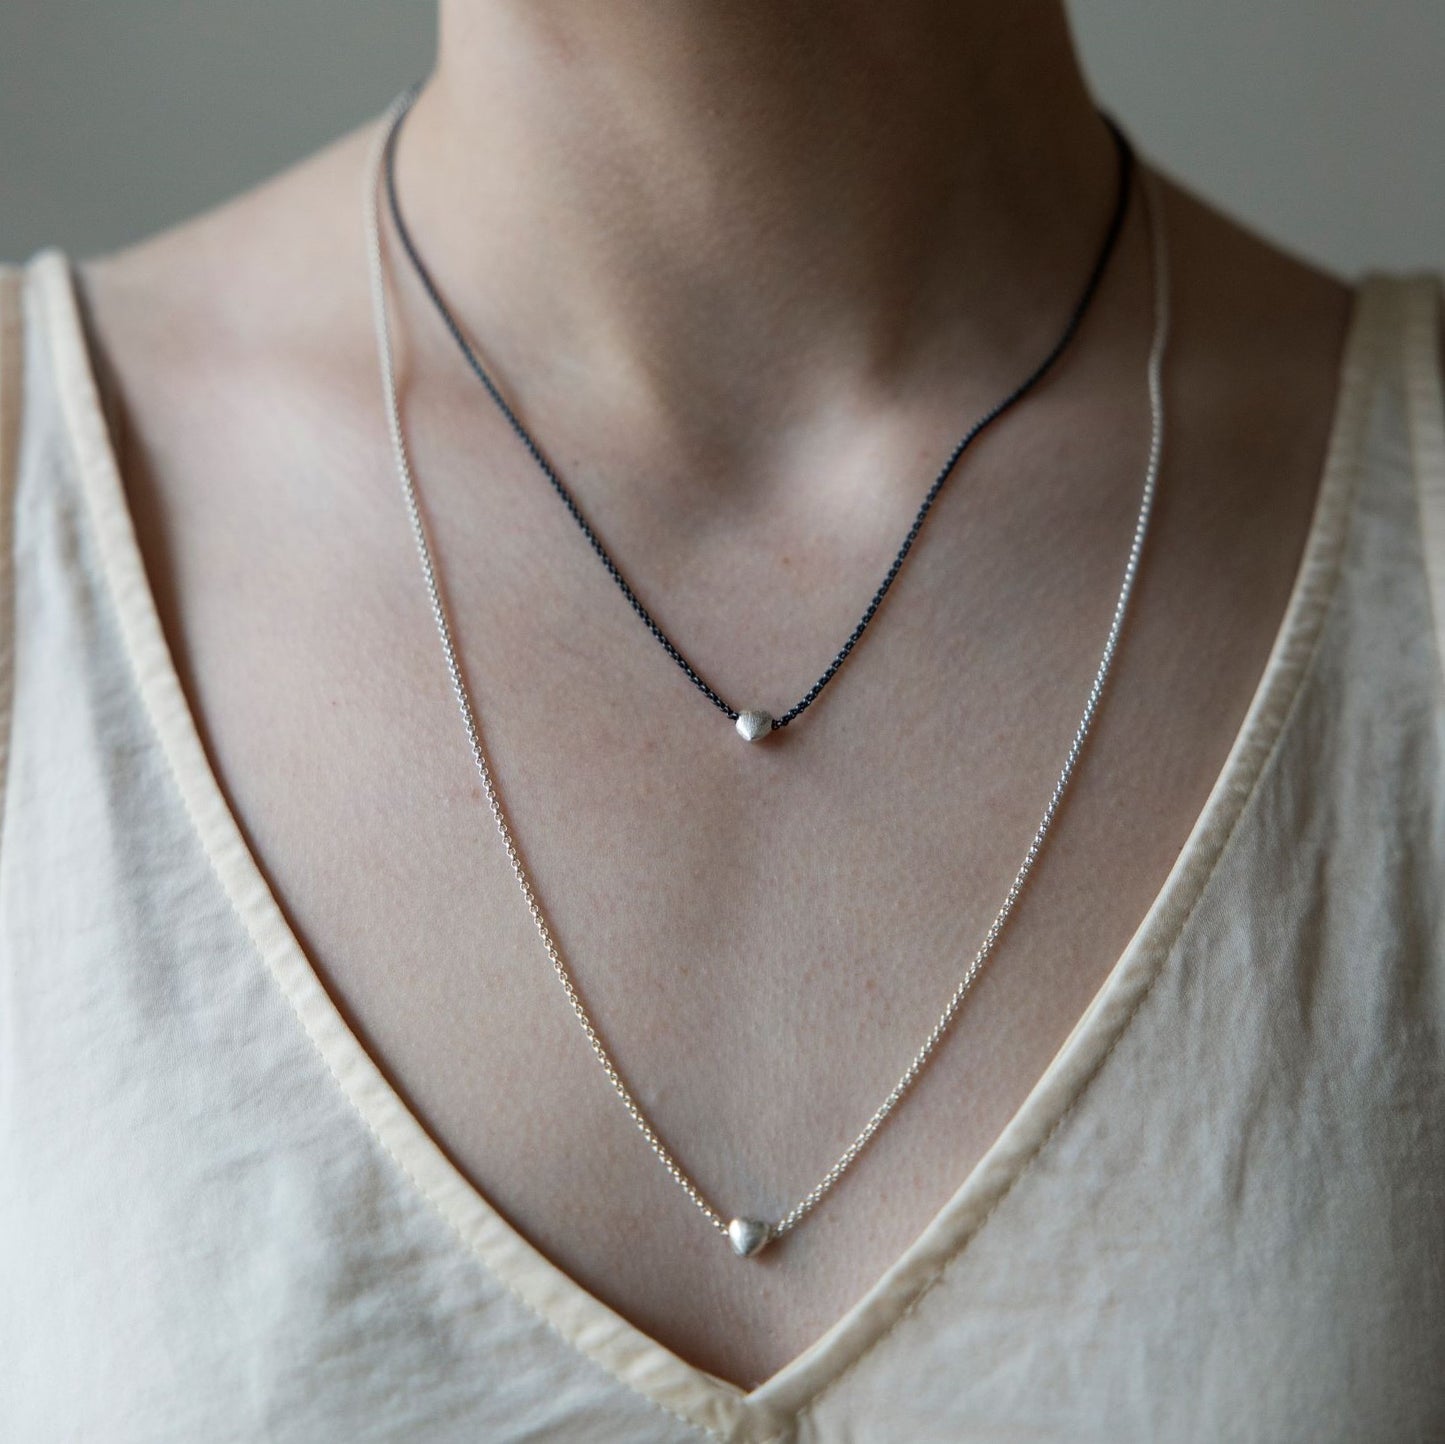 Small heart necklace